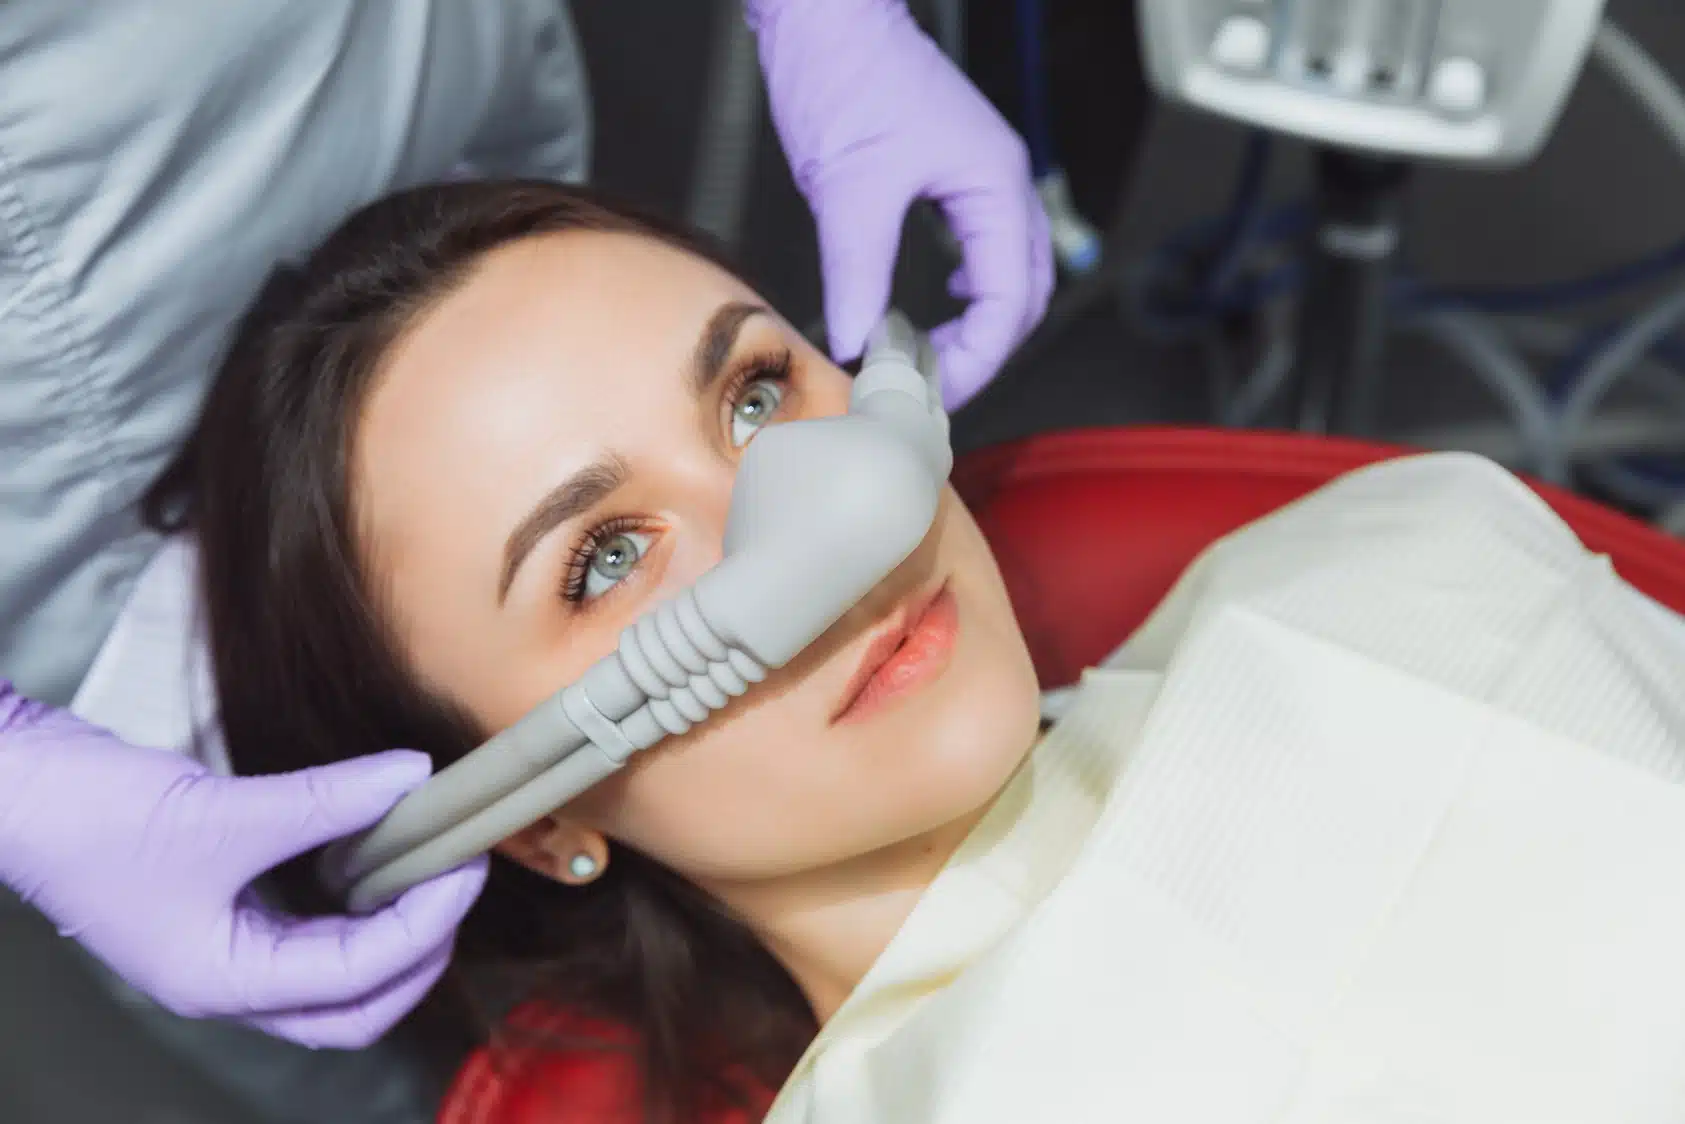 Our sedation dentistry services ensure a comfortable, relaxing experience, allowing you to face dental appointments with confidence.